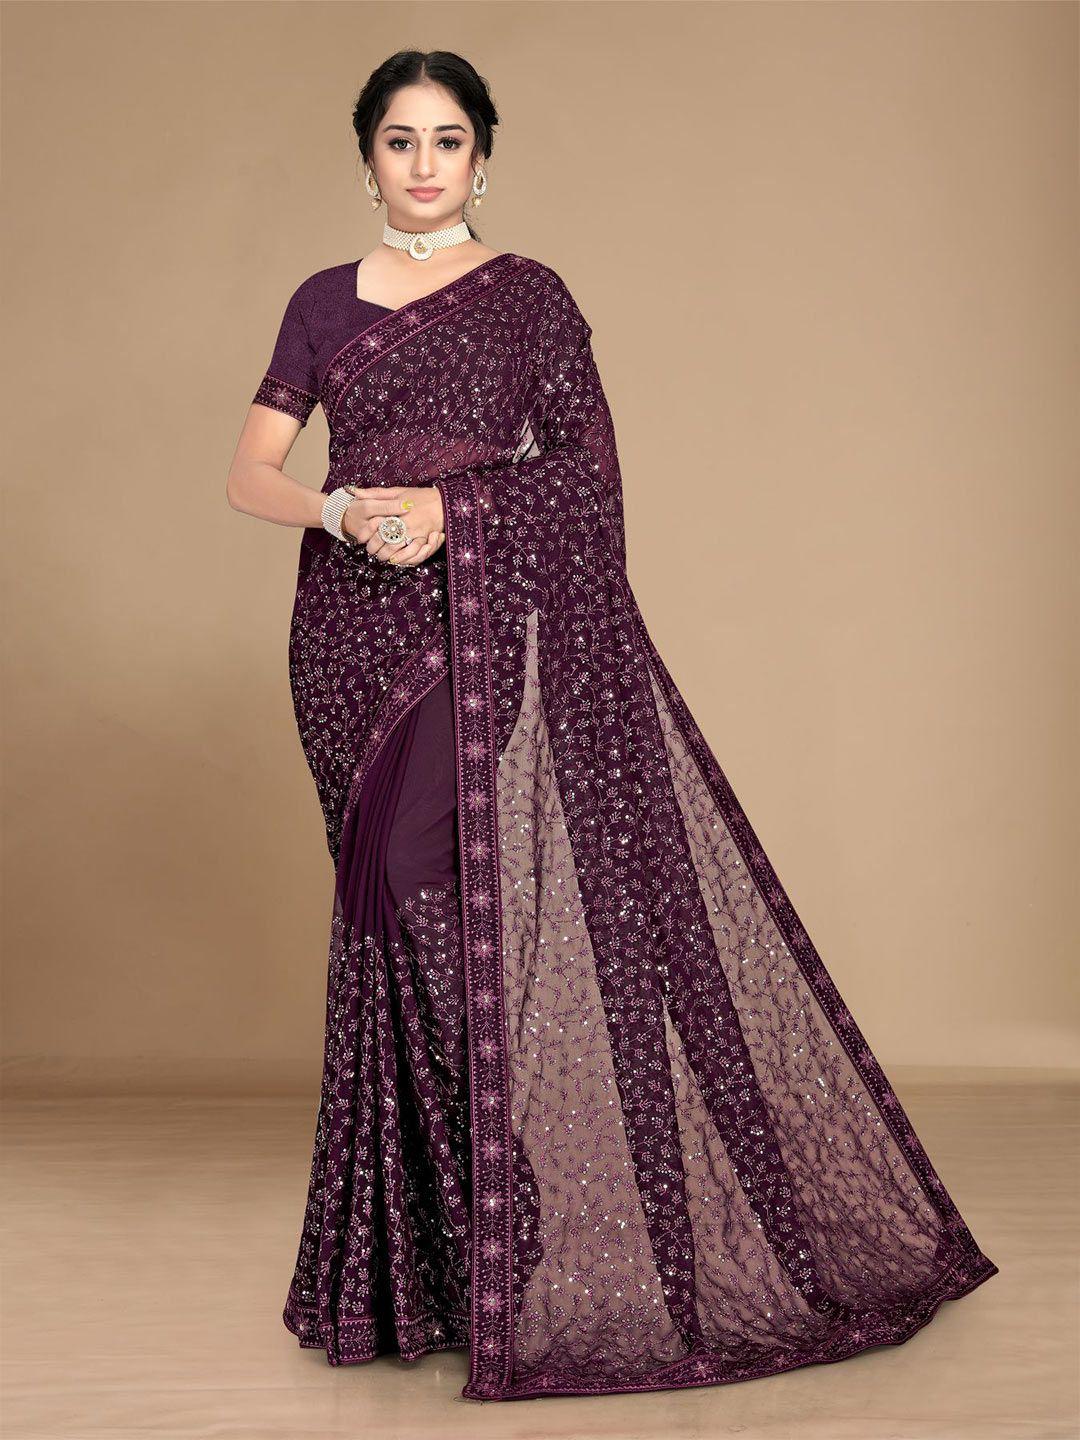 here&now purple floral embroidered saree